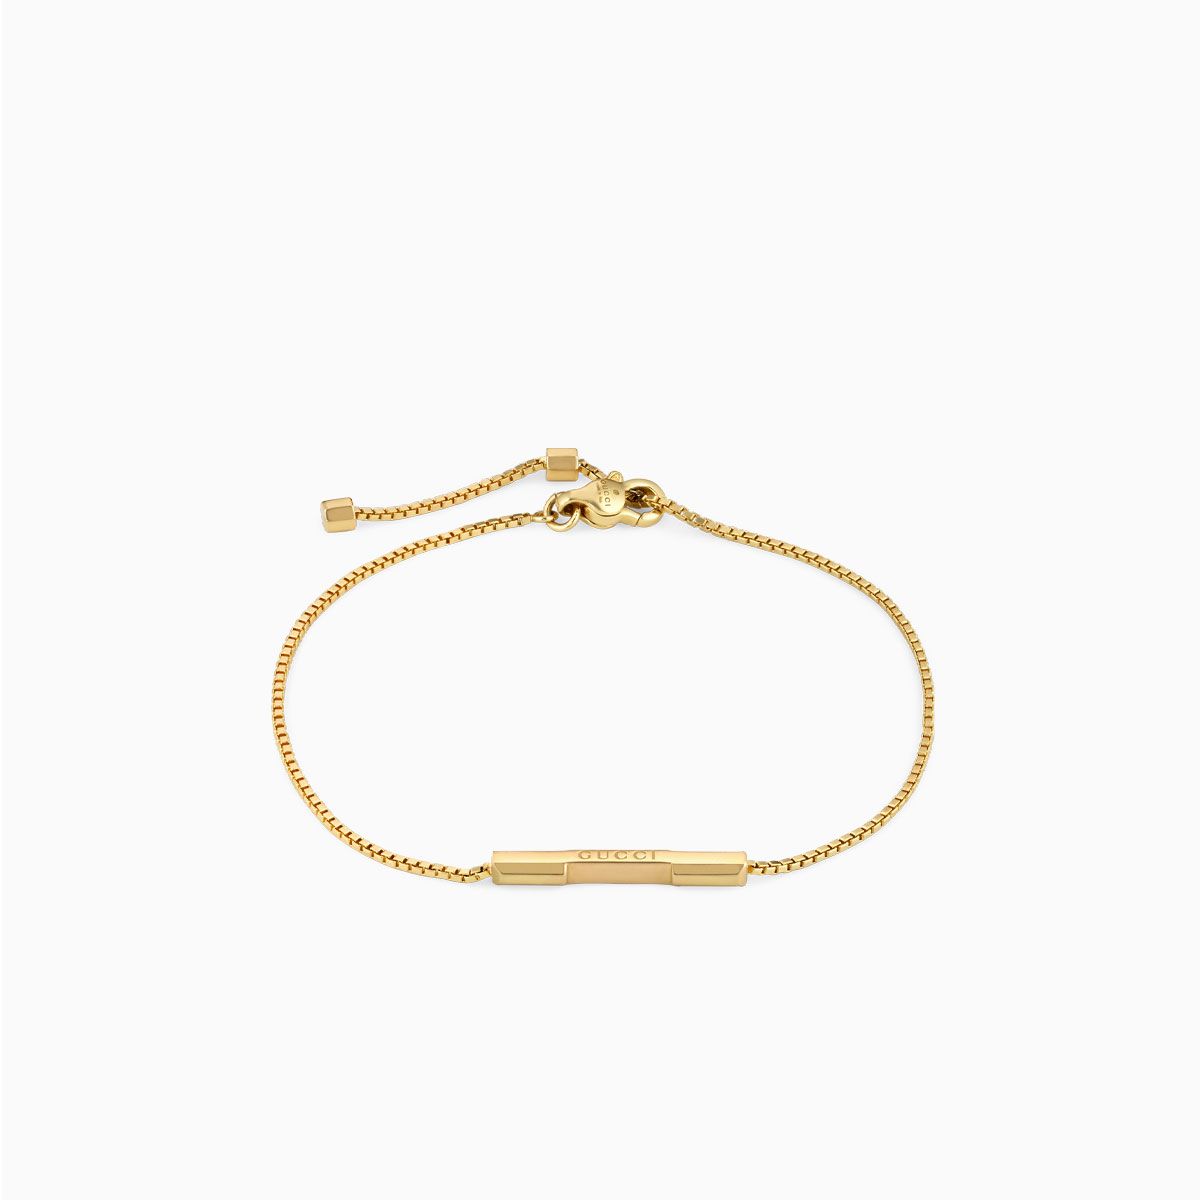 Bracelet Gucci Link to Love yellow gold